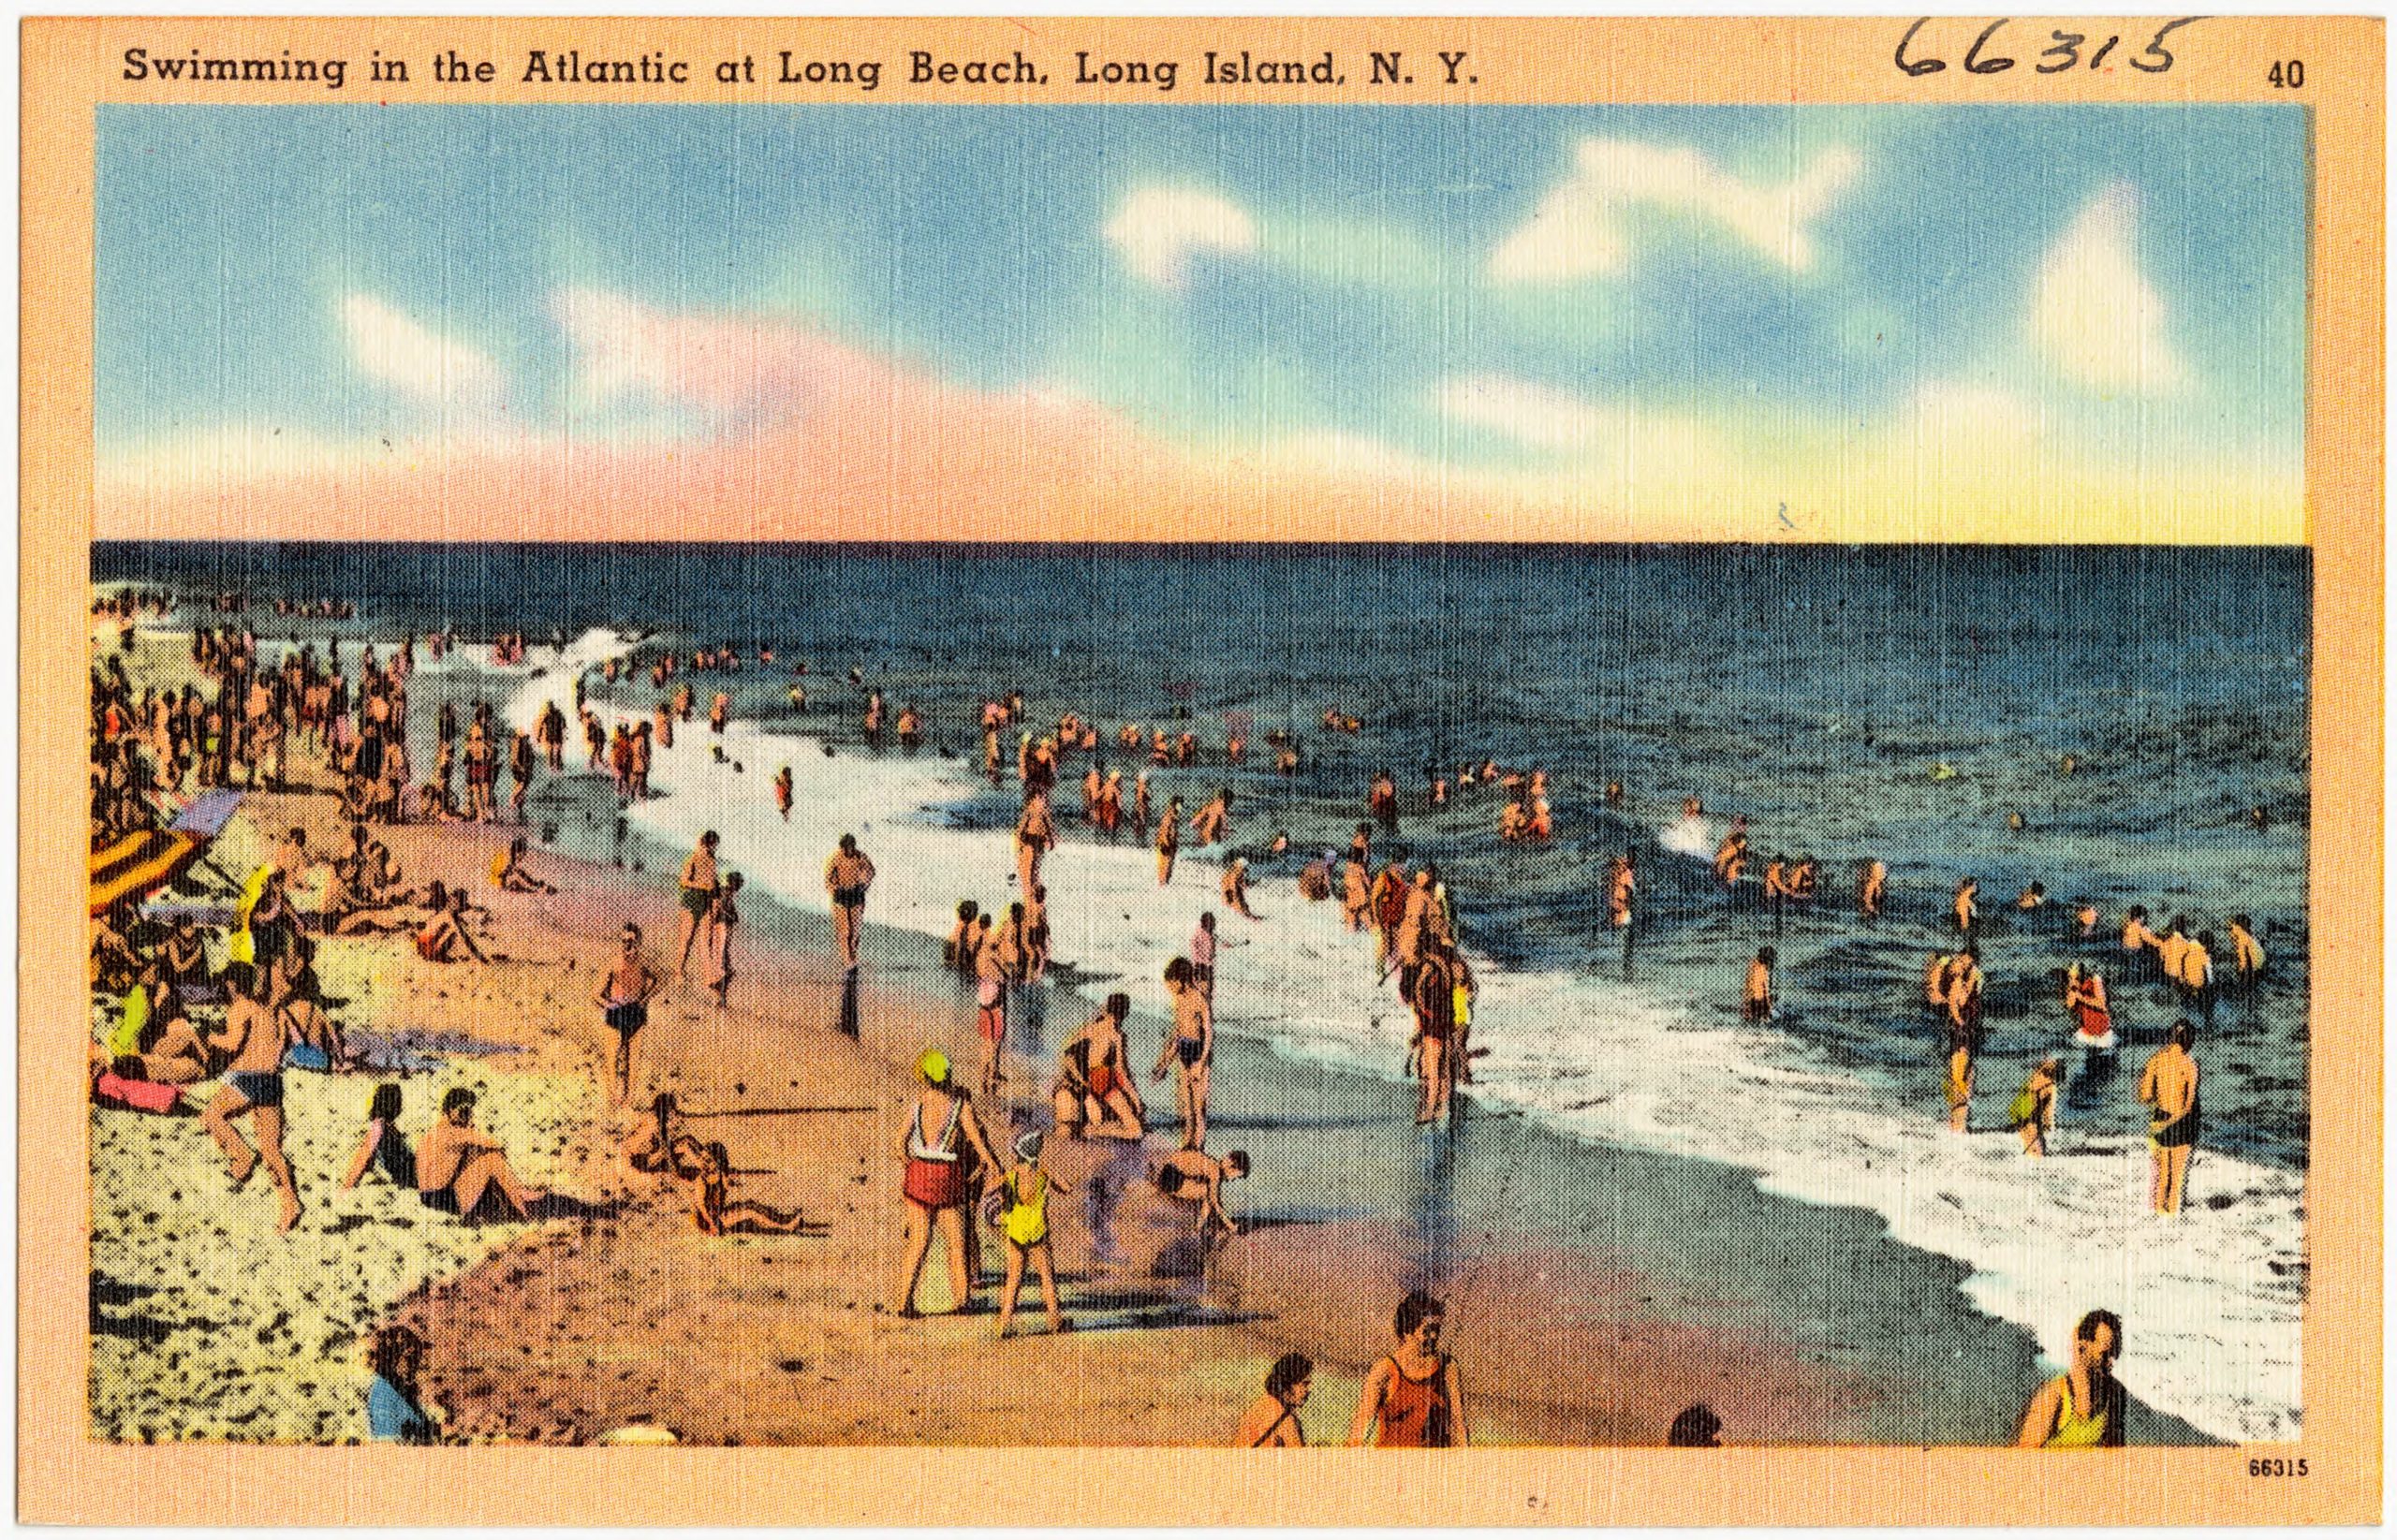 11 pictures of Jones Beach State Park Long Island from the 1950s